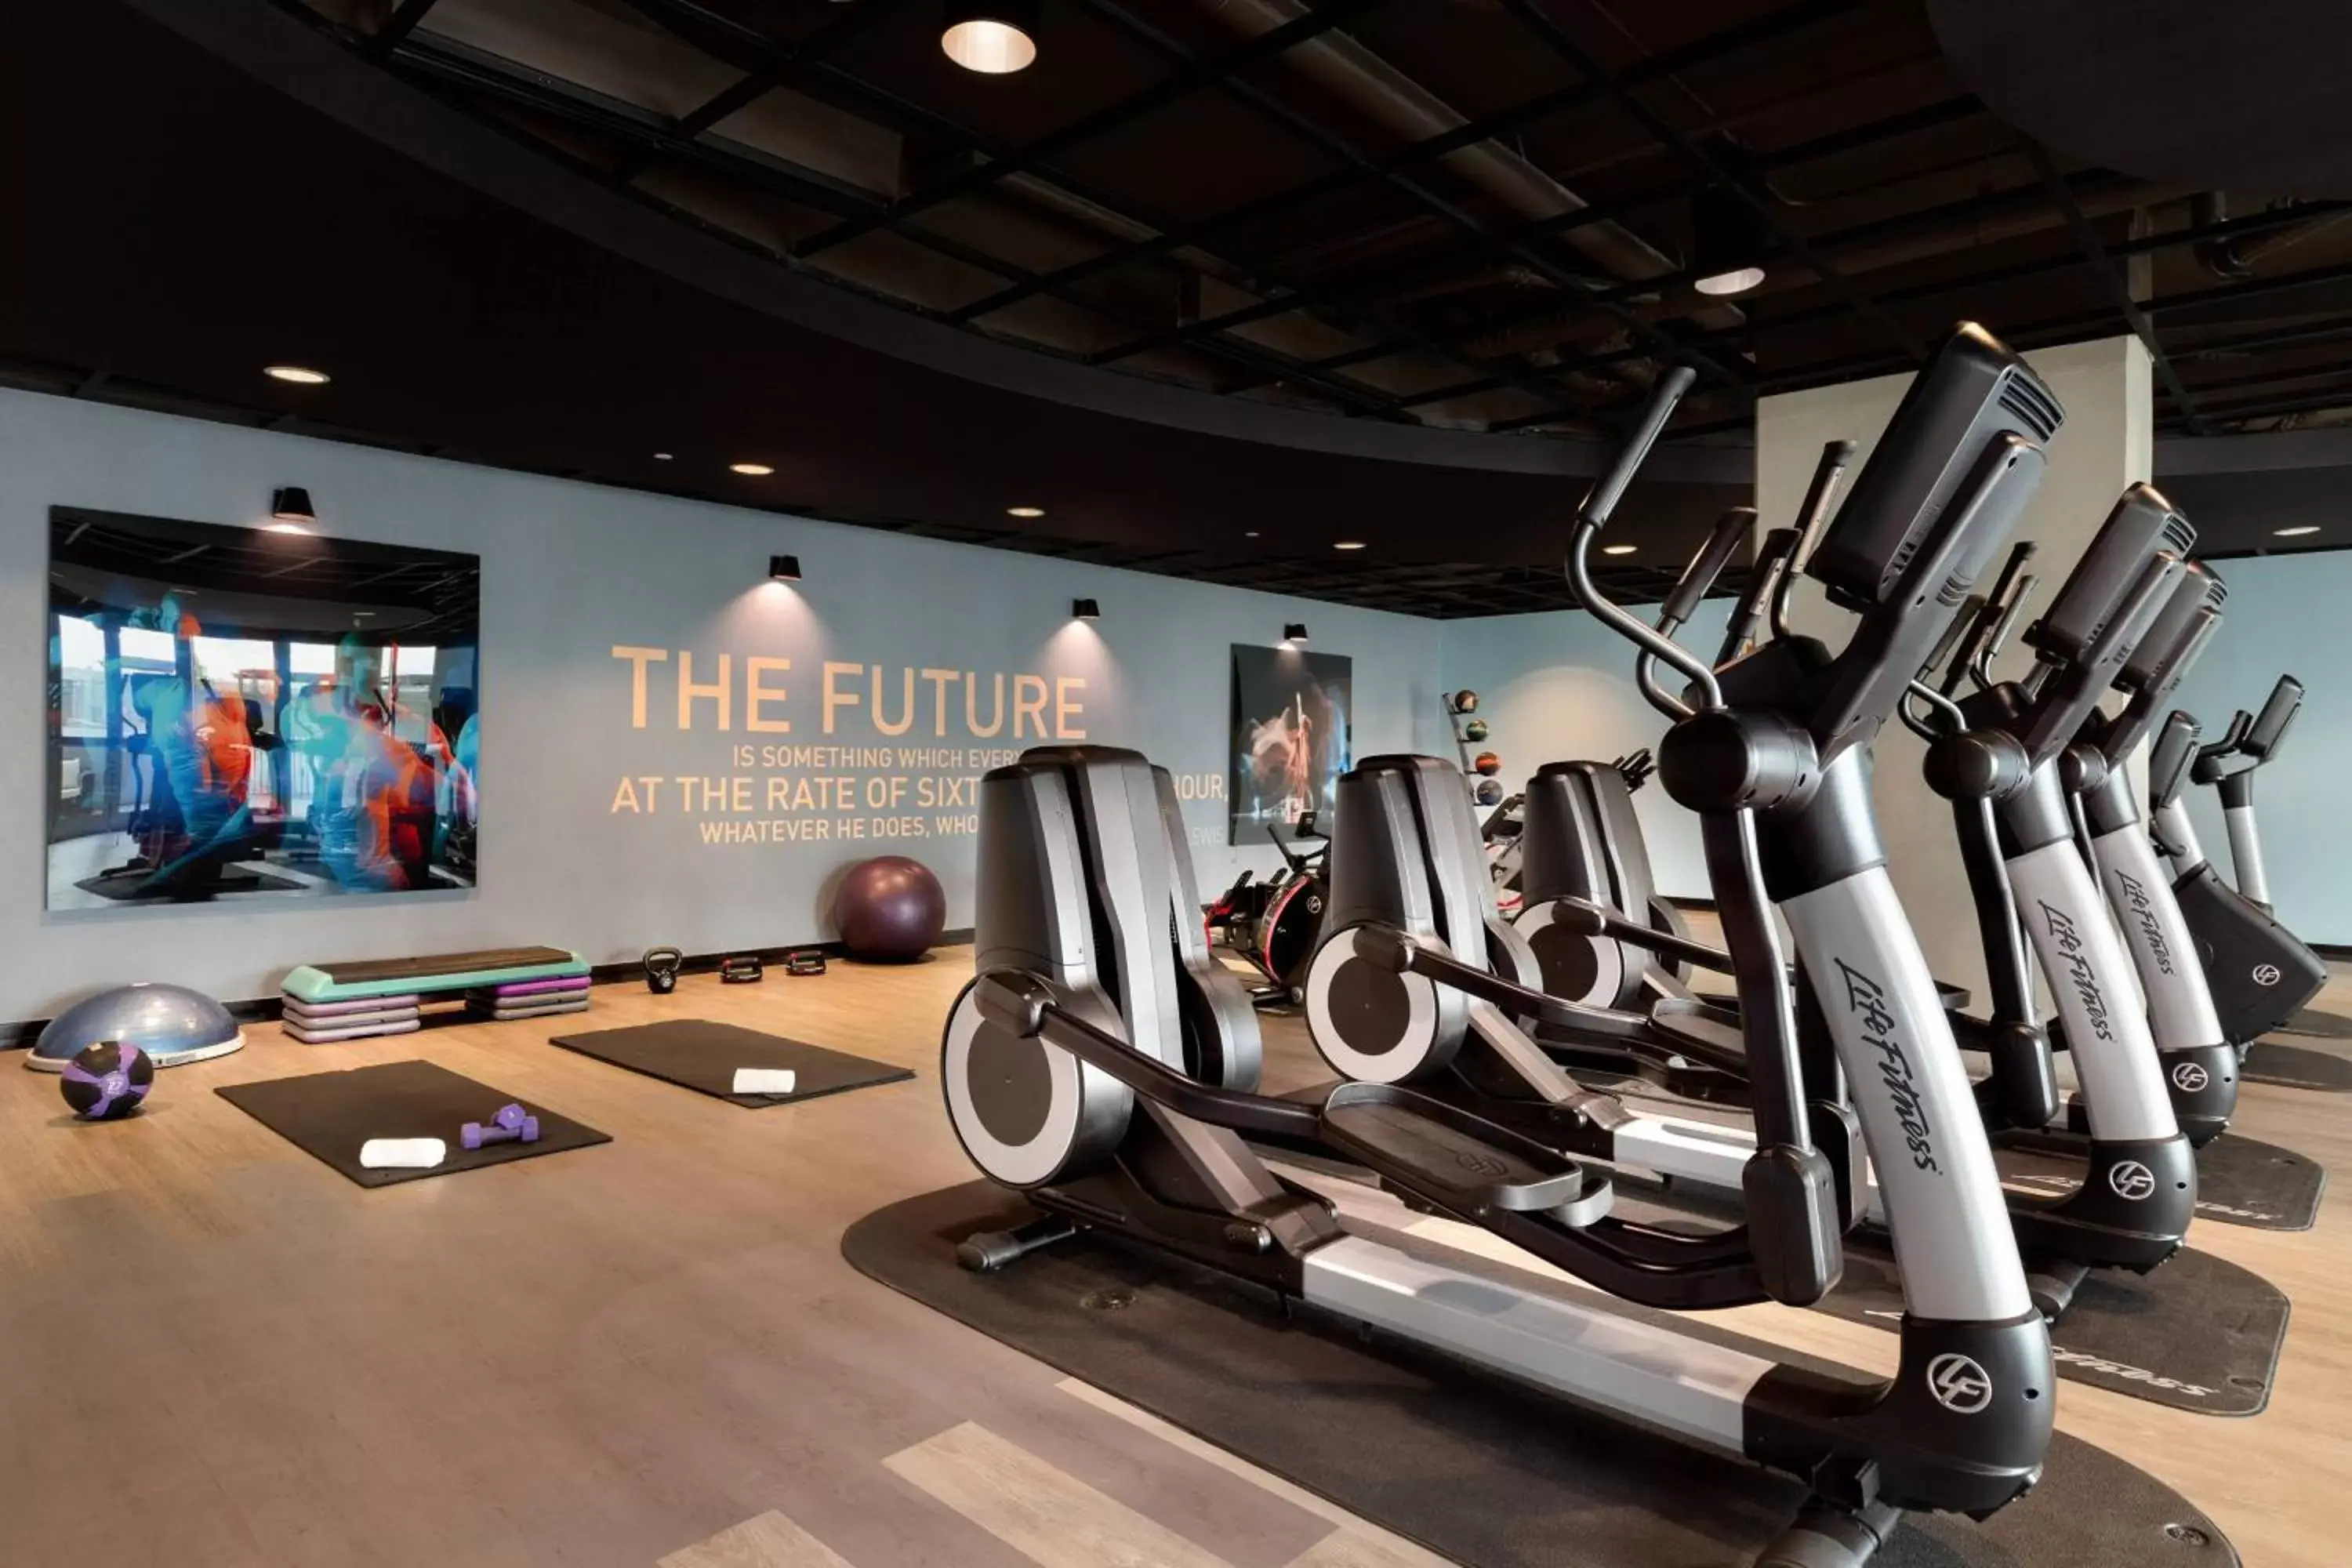 Fitness centre/facilities, Fitness Center/Facilities in Twelve Midtown, Marriott Autograph Collection